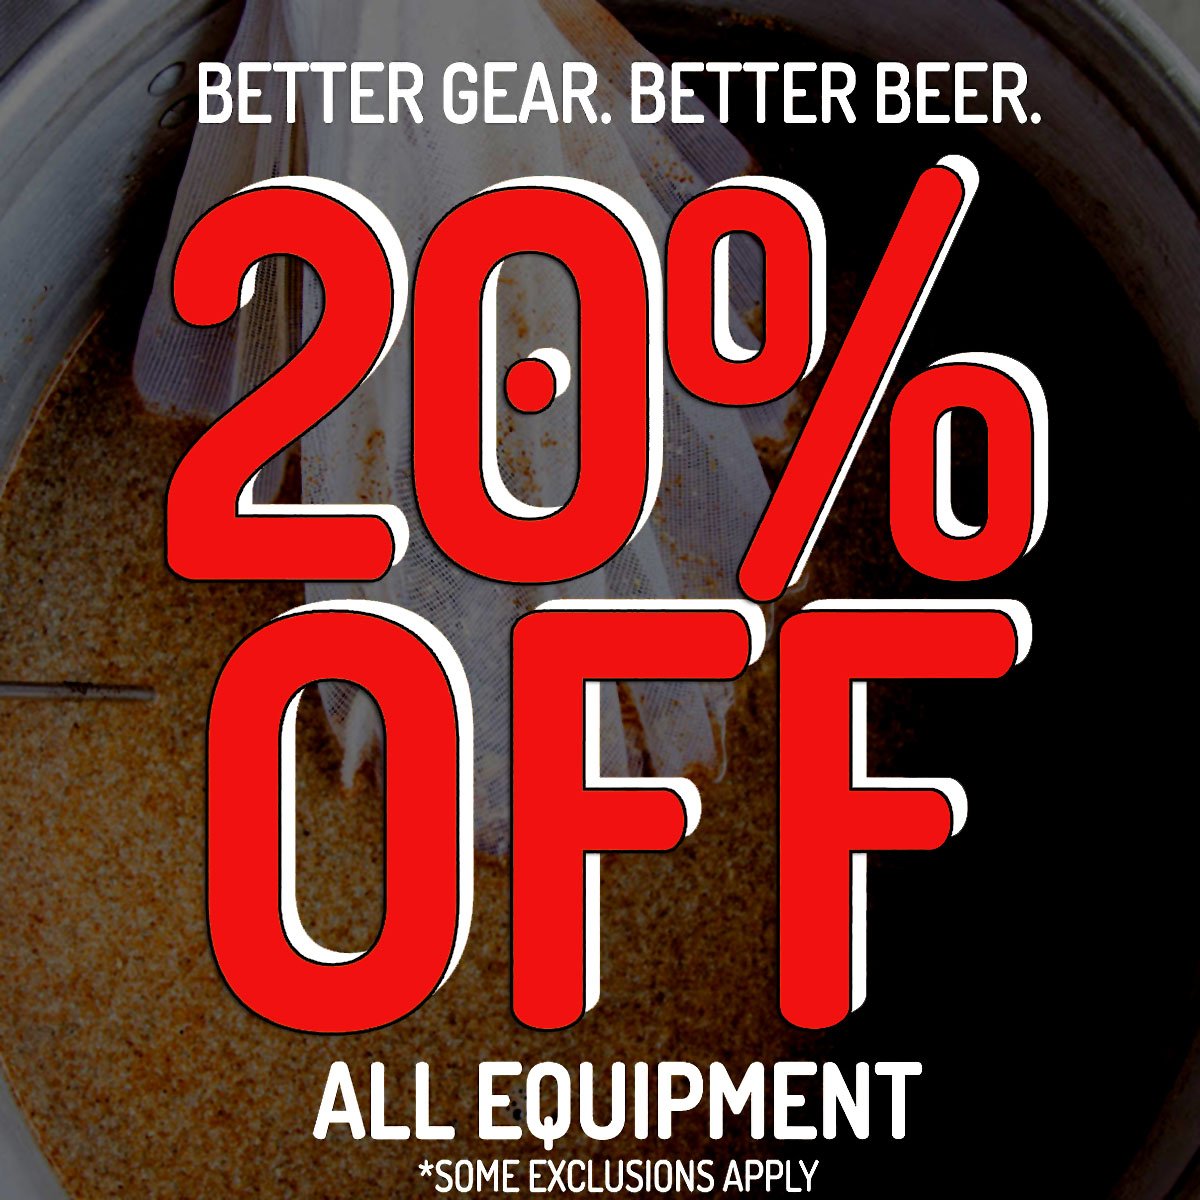 Midwest Supplies Promo Code - Additional 20% Off Homebrewing Equipment